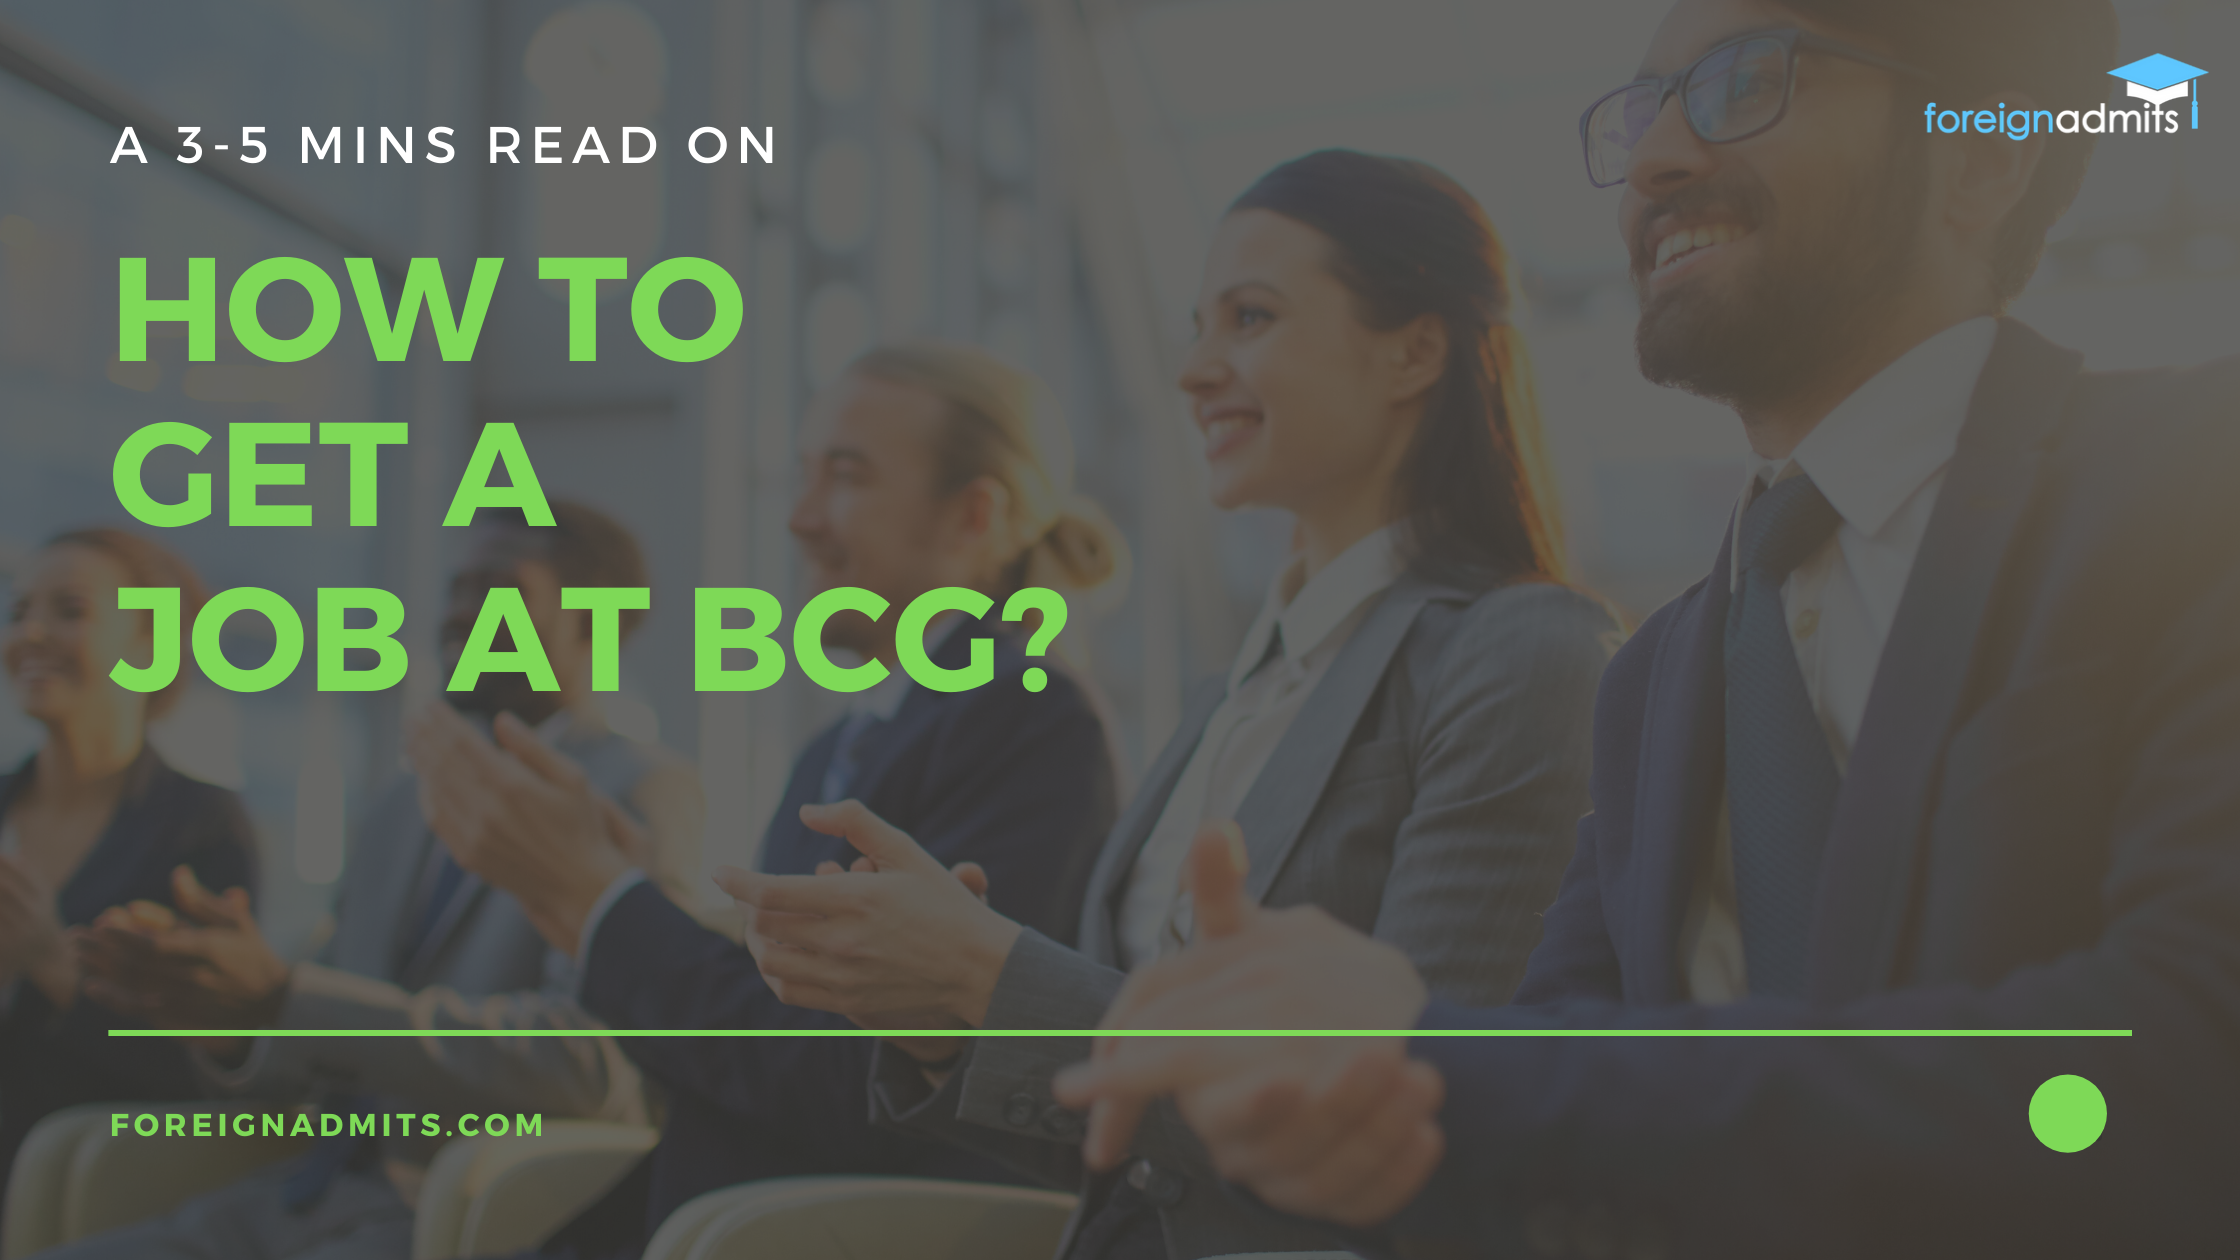 How to get a job at BCG?